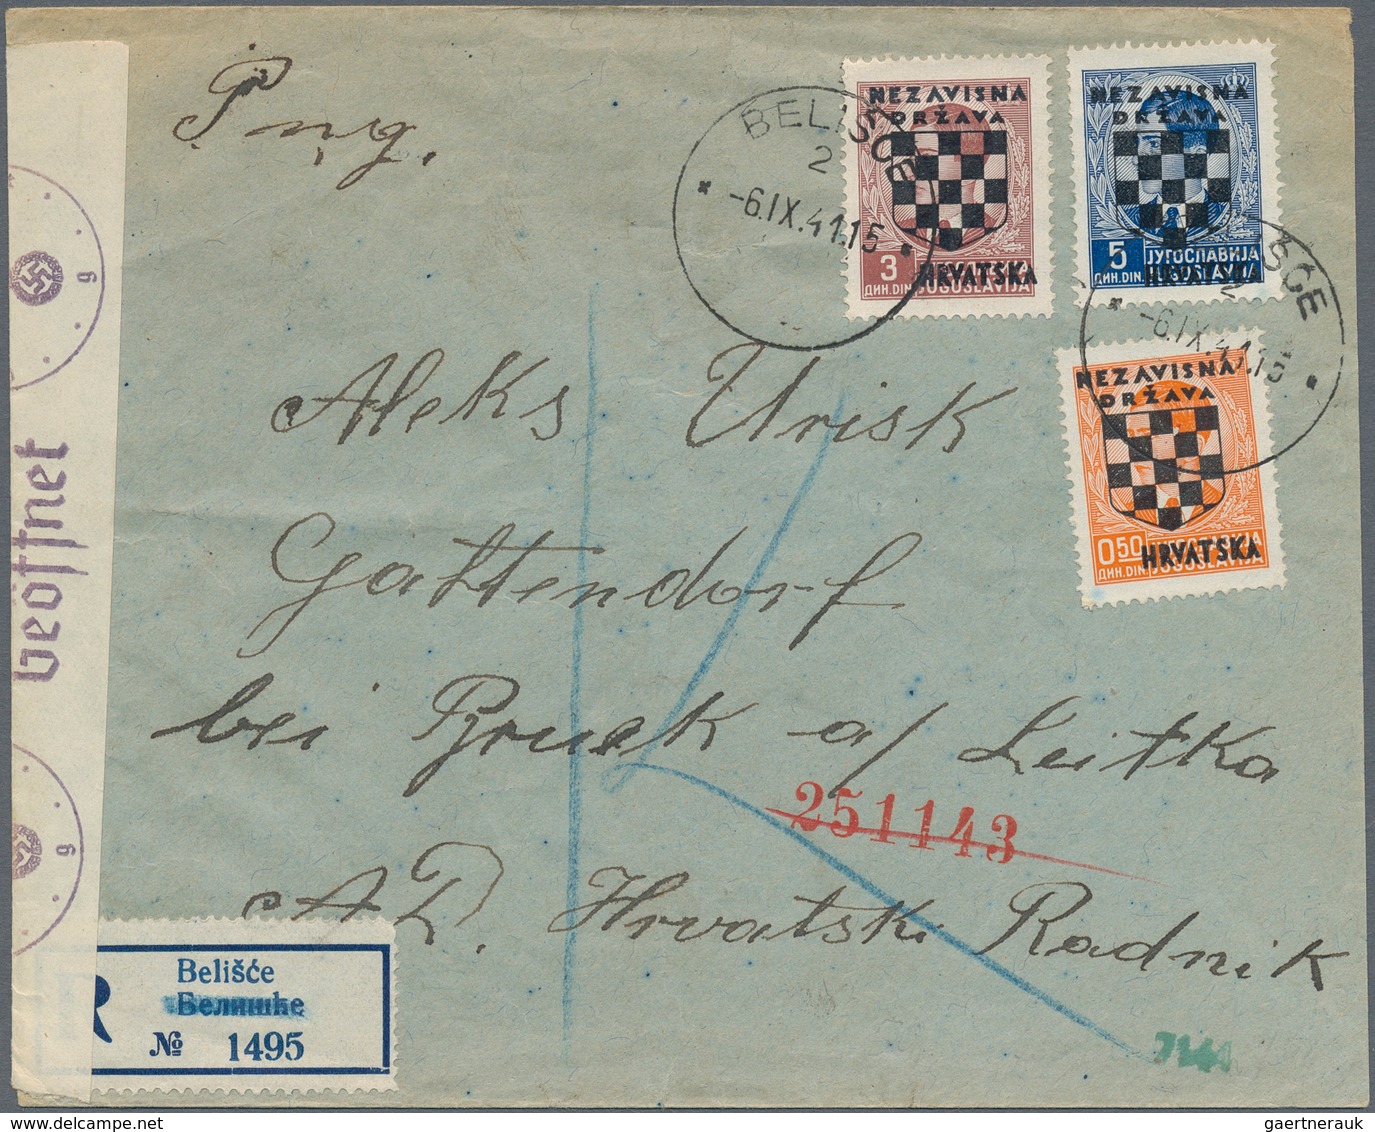 Kroatien: 1941/1944, collection of apprx. 60 commercial covers showing a nice range of interesting f